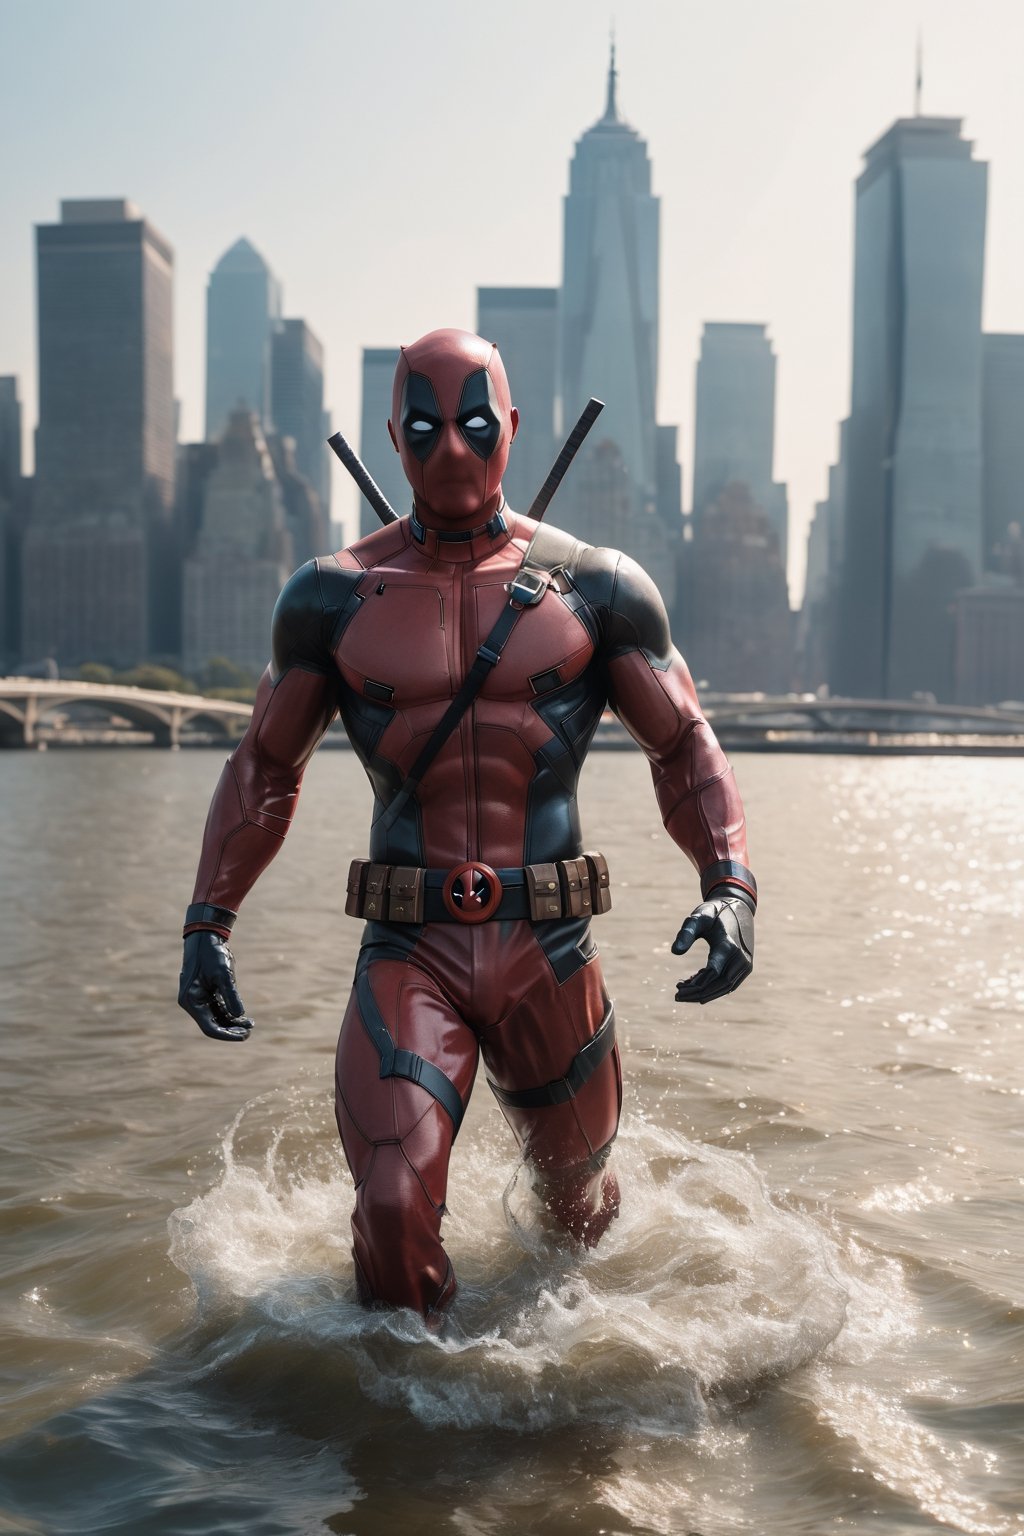 A god among mortals, Deadpool strides across the water with casual grace, his rippling muscles glistening in the sunlight. The city skyline towers in the background, a testament to his power and influence. The image is a modern masterpiece, rendered in stunning detail with legendary colors that pop off the screen. The dynamic shot captures the power and majesty of the moment, while the superrealism and cinematography bring it to life.

